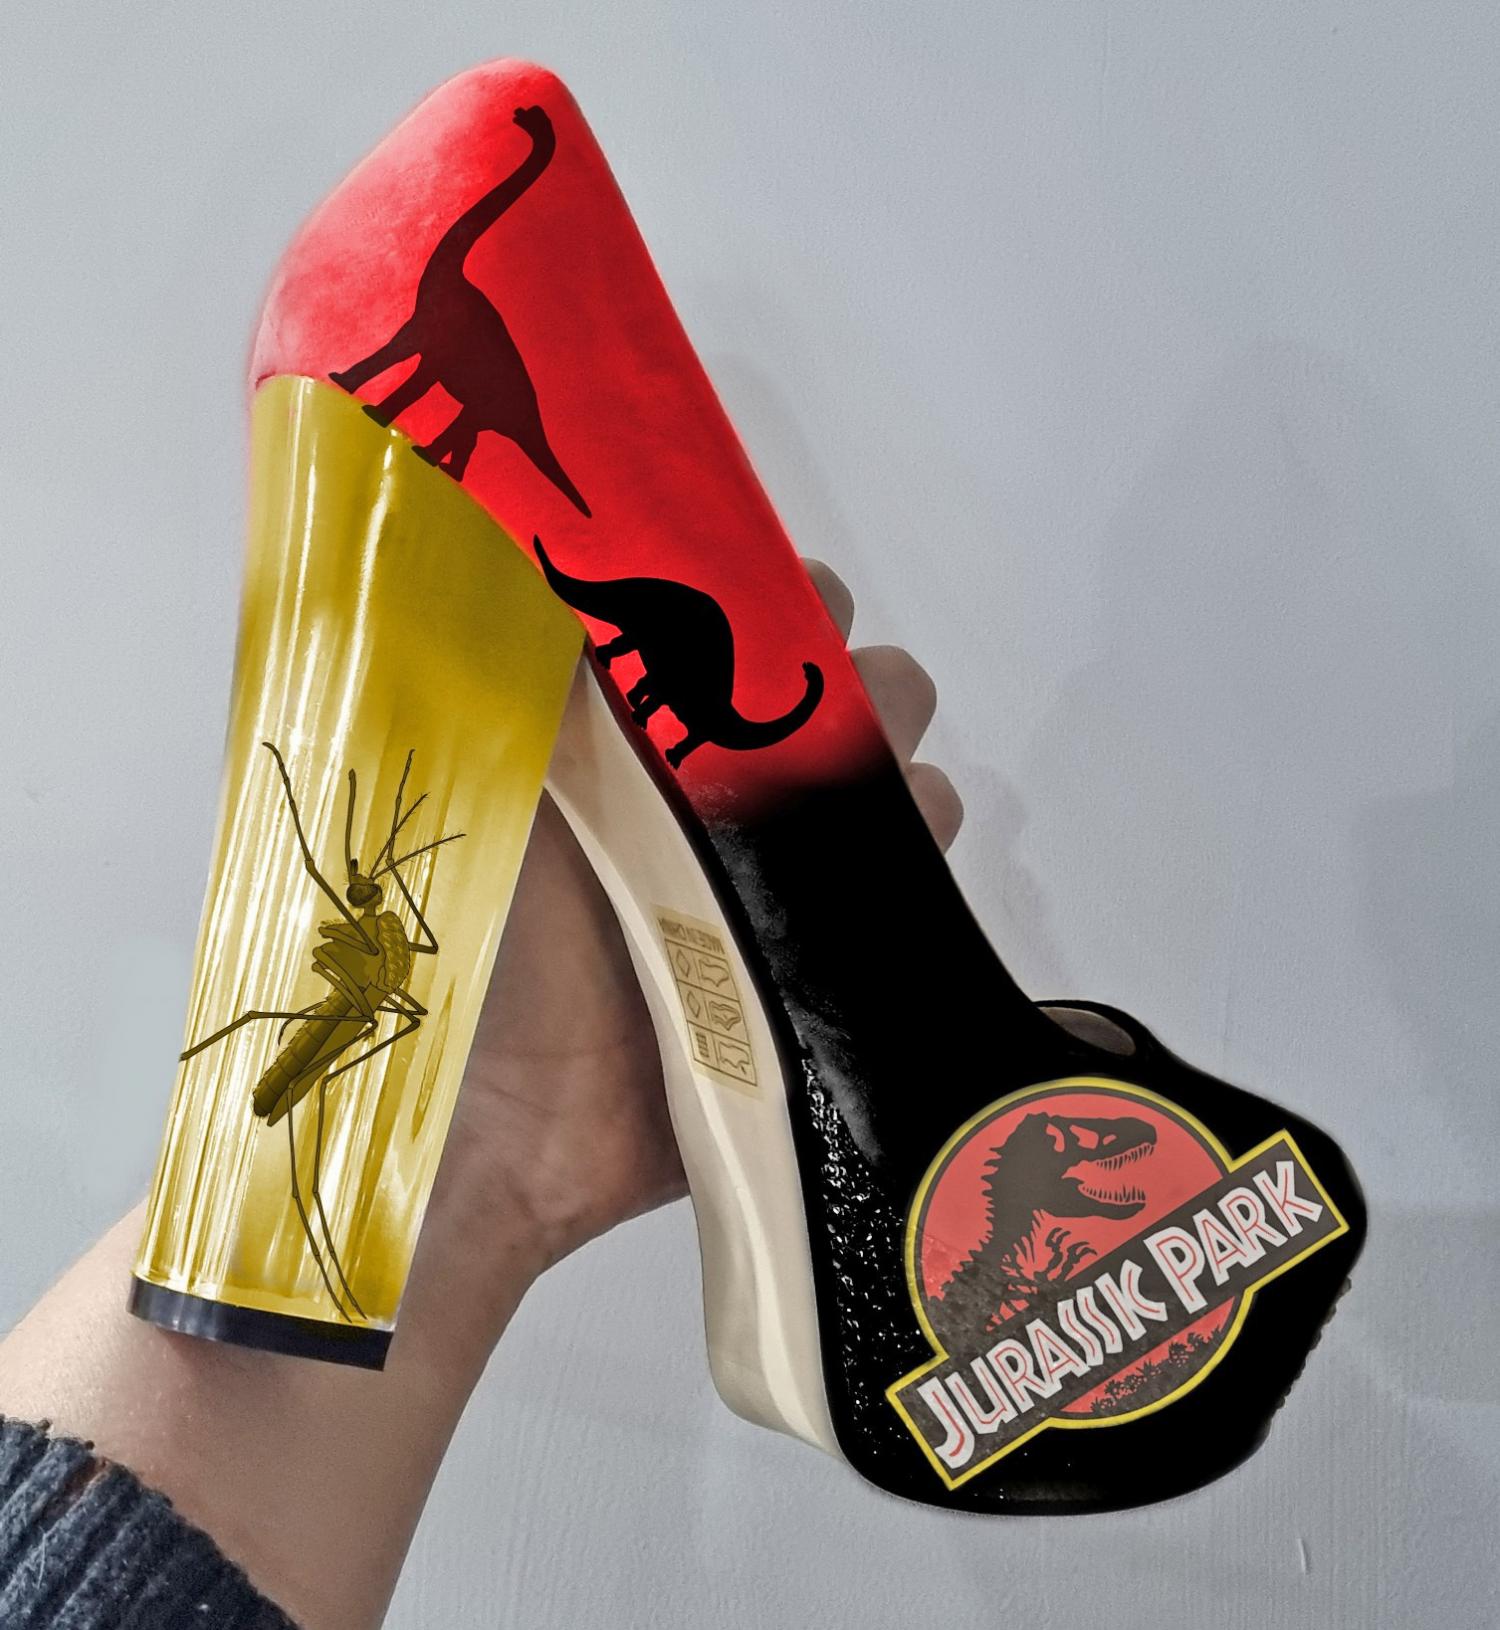 Light-Up Jurassic Park Heels With Giant Mosquito Stuck In Amber